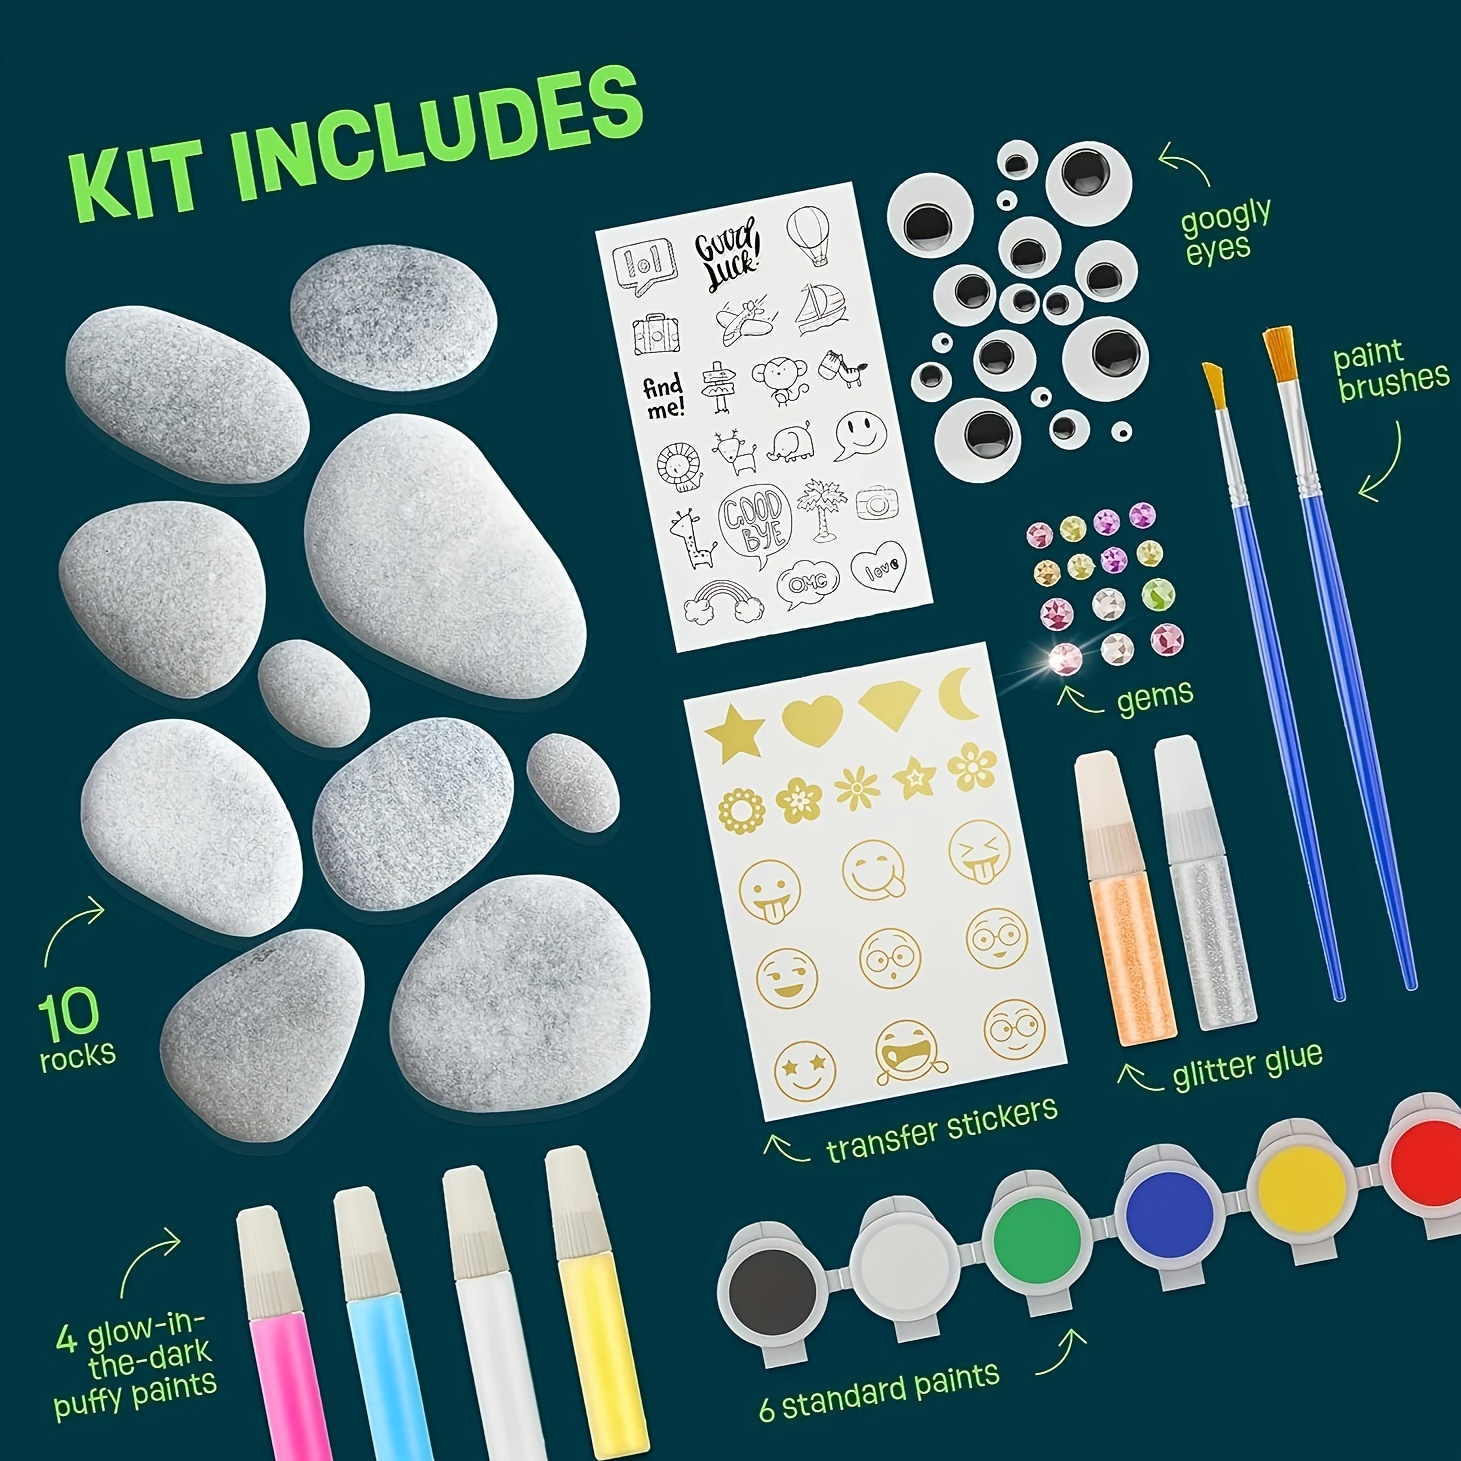 Rock Painting kit for Adults and Kids - Kids Painting kit with Rock  Painting Supplies for Painting Rocks | Painting Kits for Kids for Rock Art  Paint